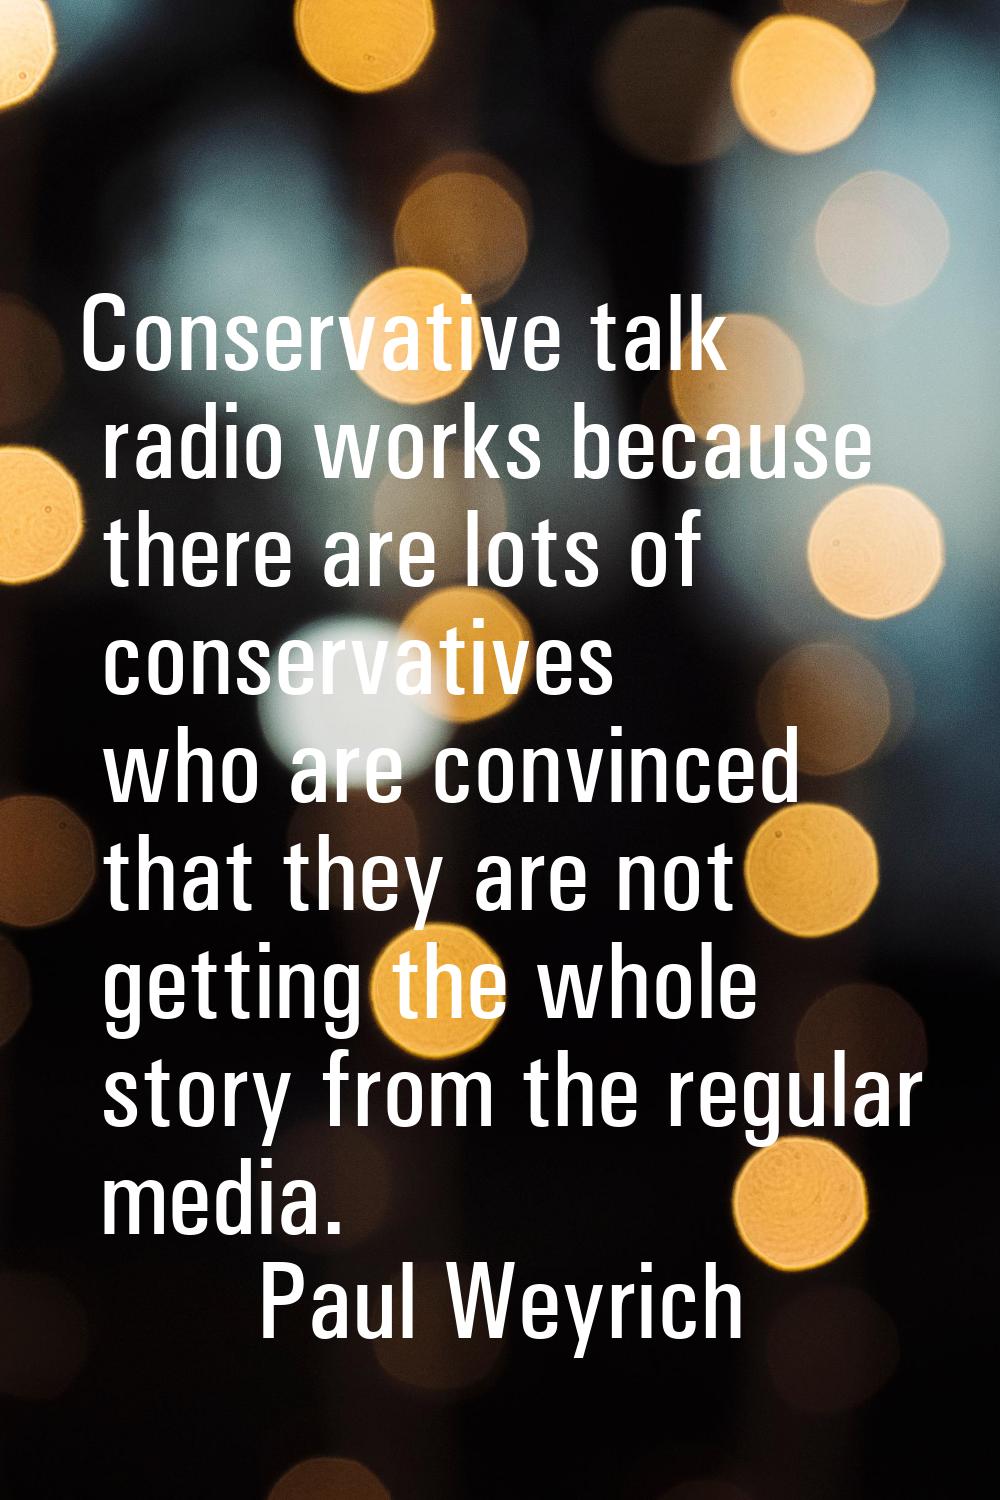 Conservative talk radio works because there are lots of conservatives who are convinced that they a